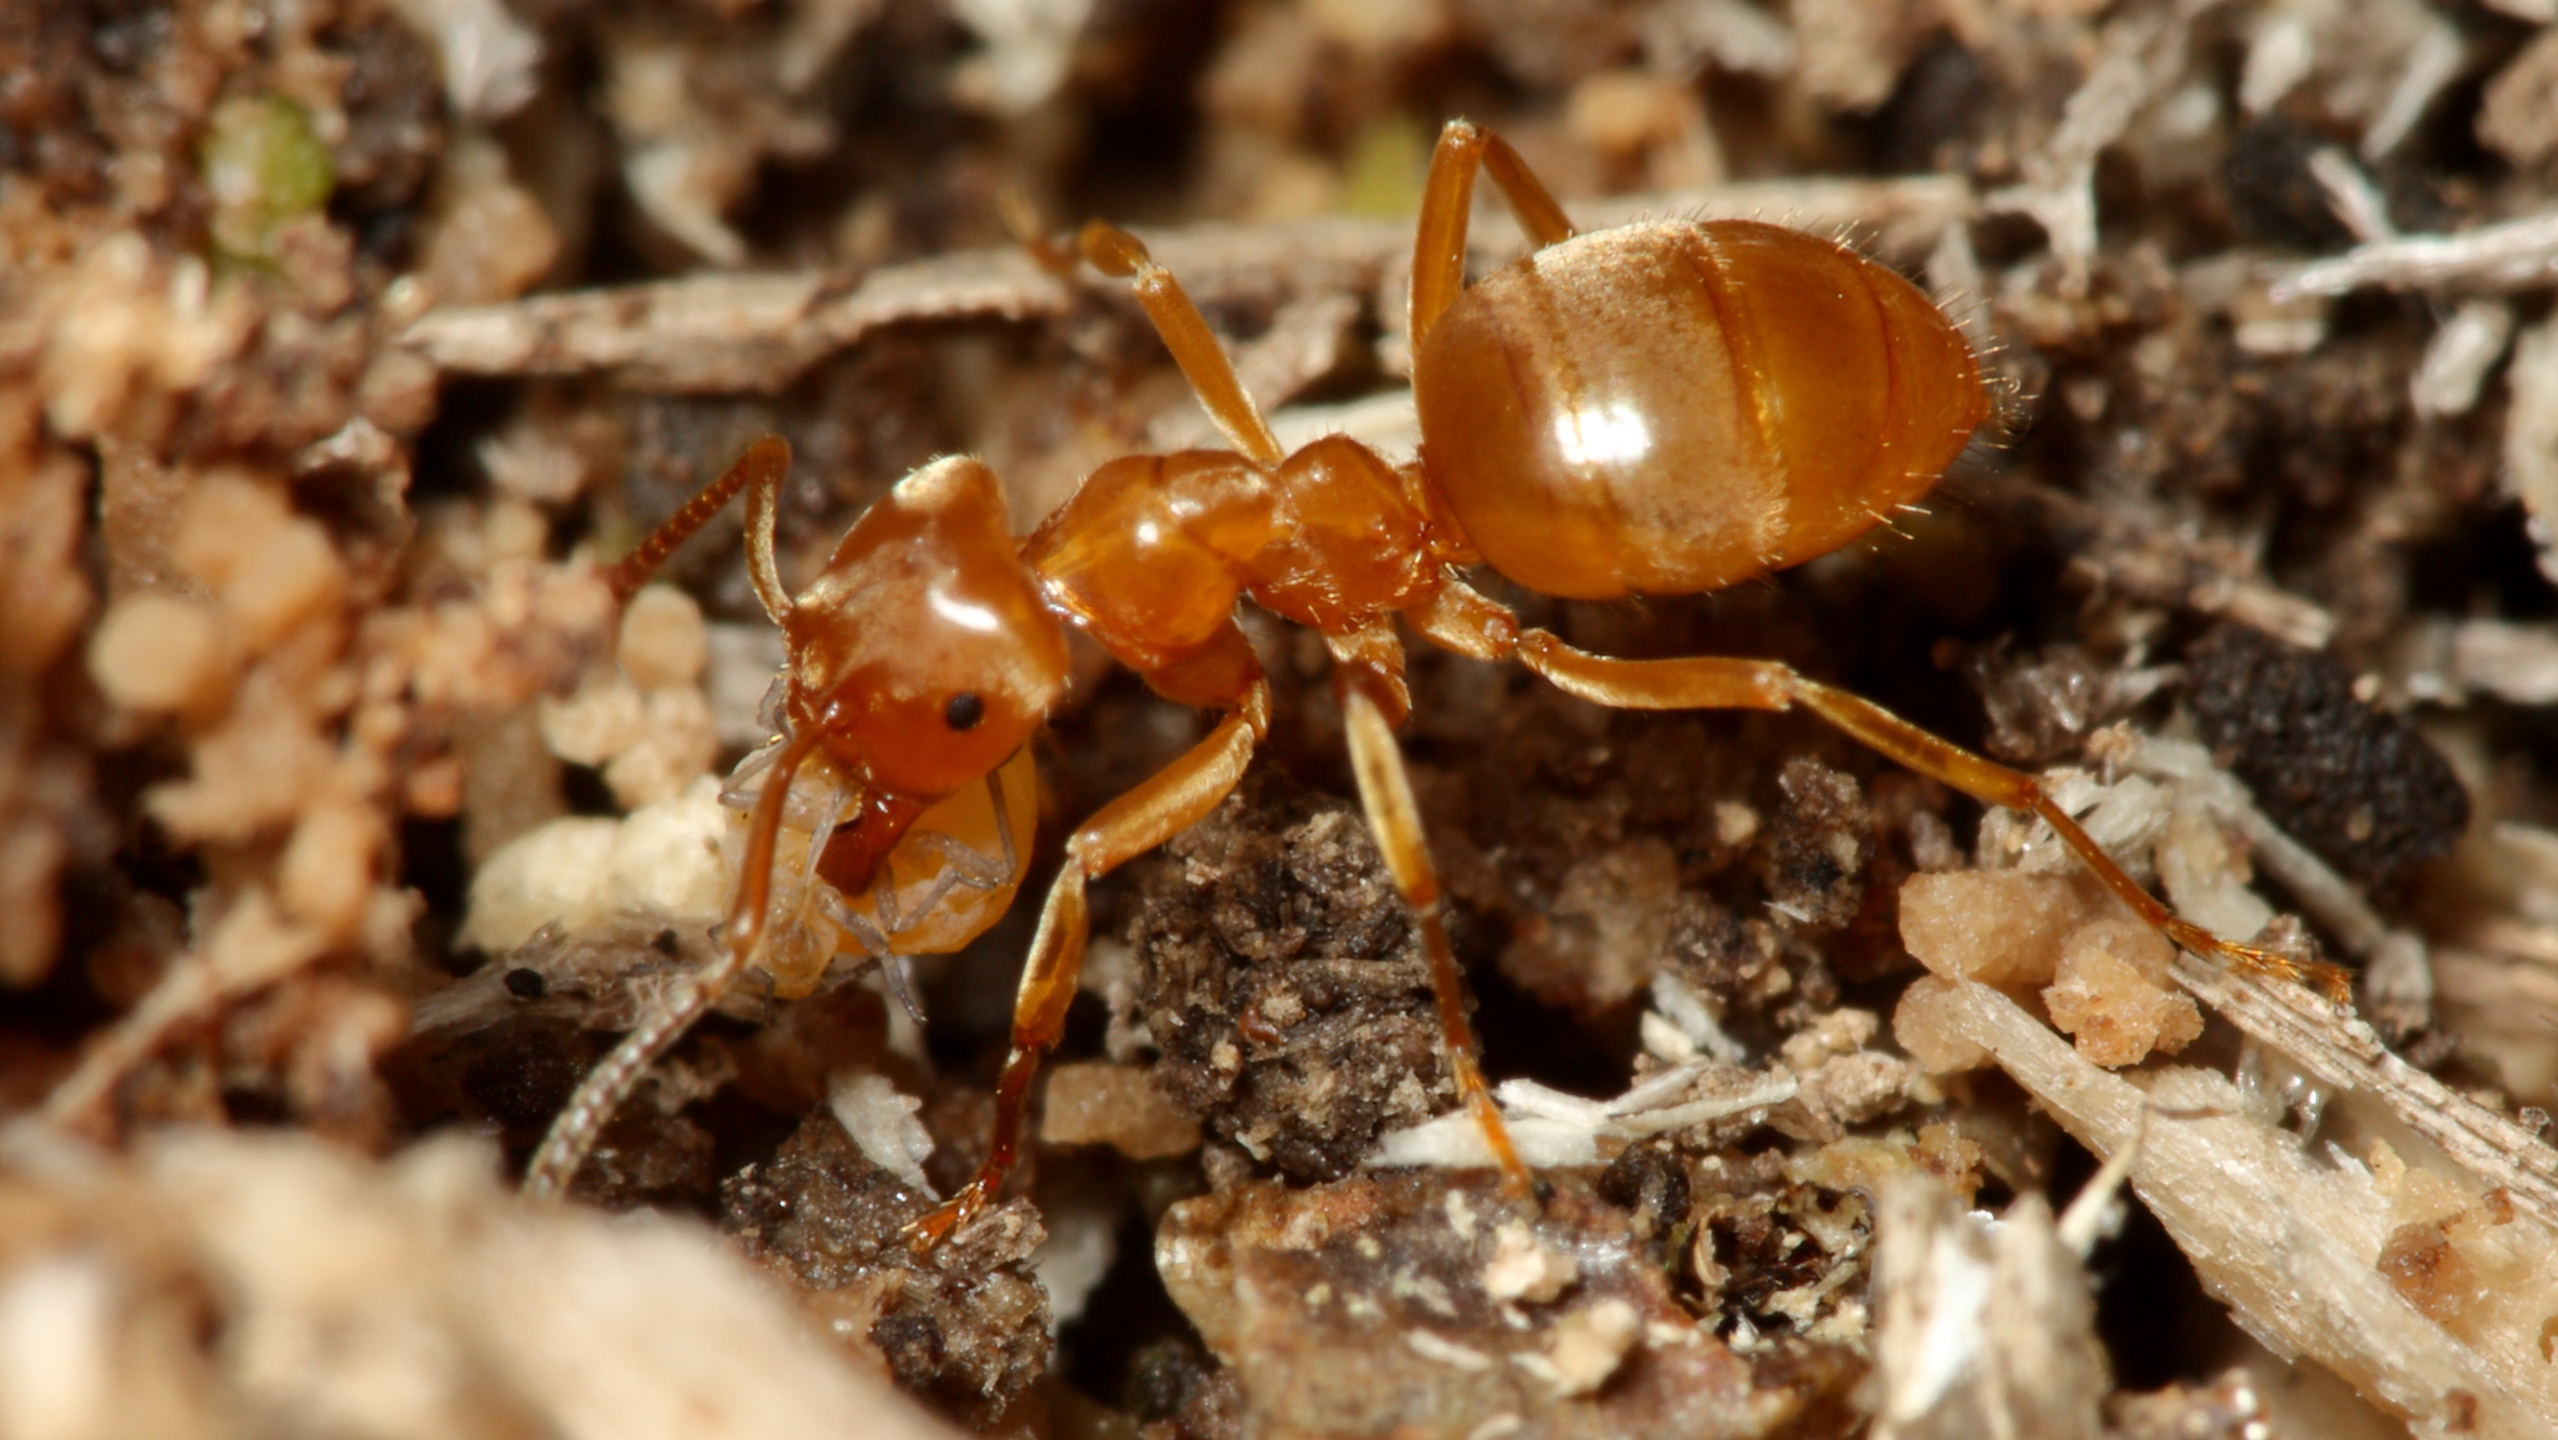 Lasius ant worker with aphid